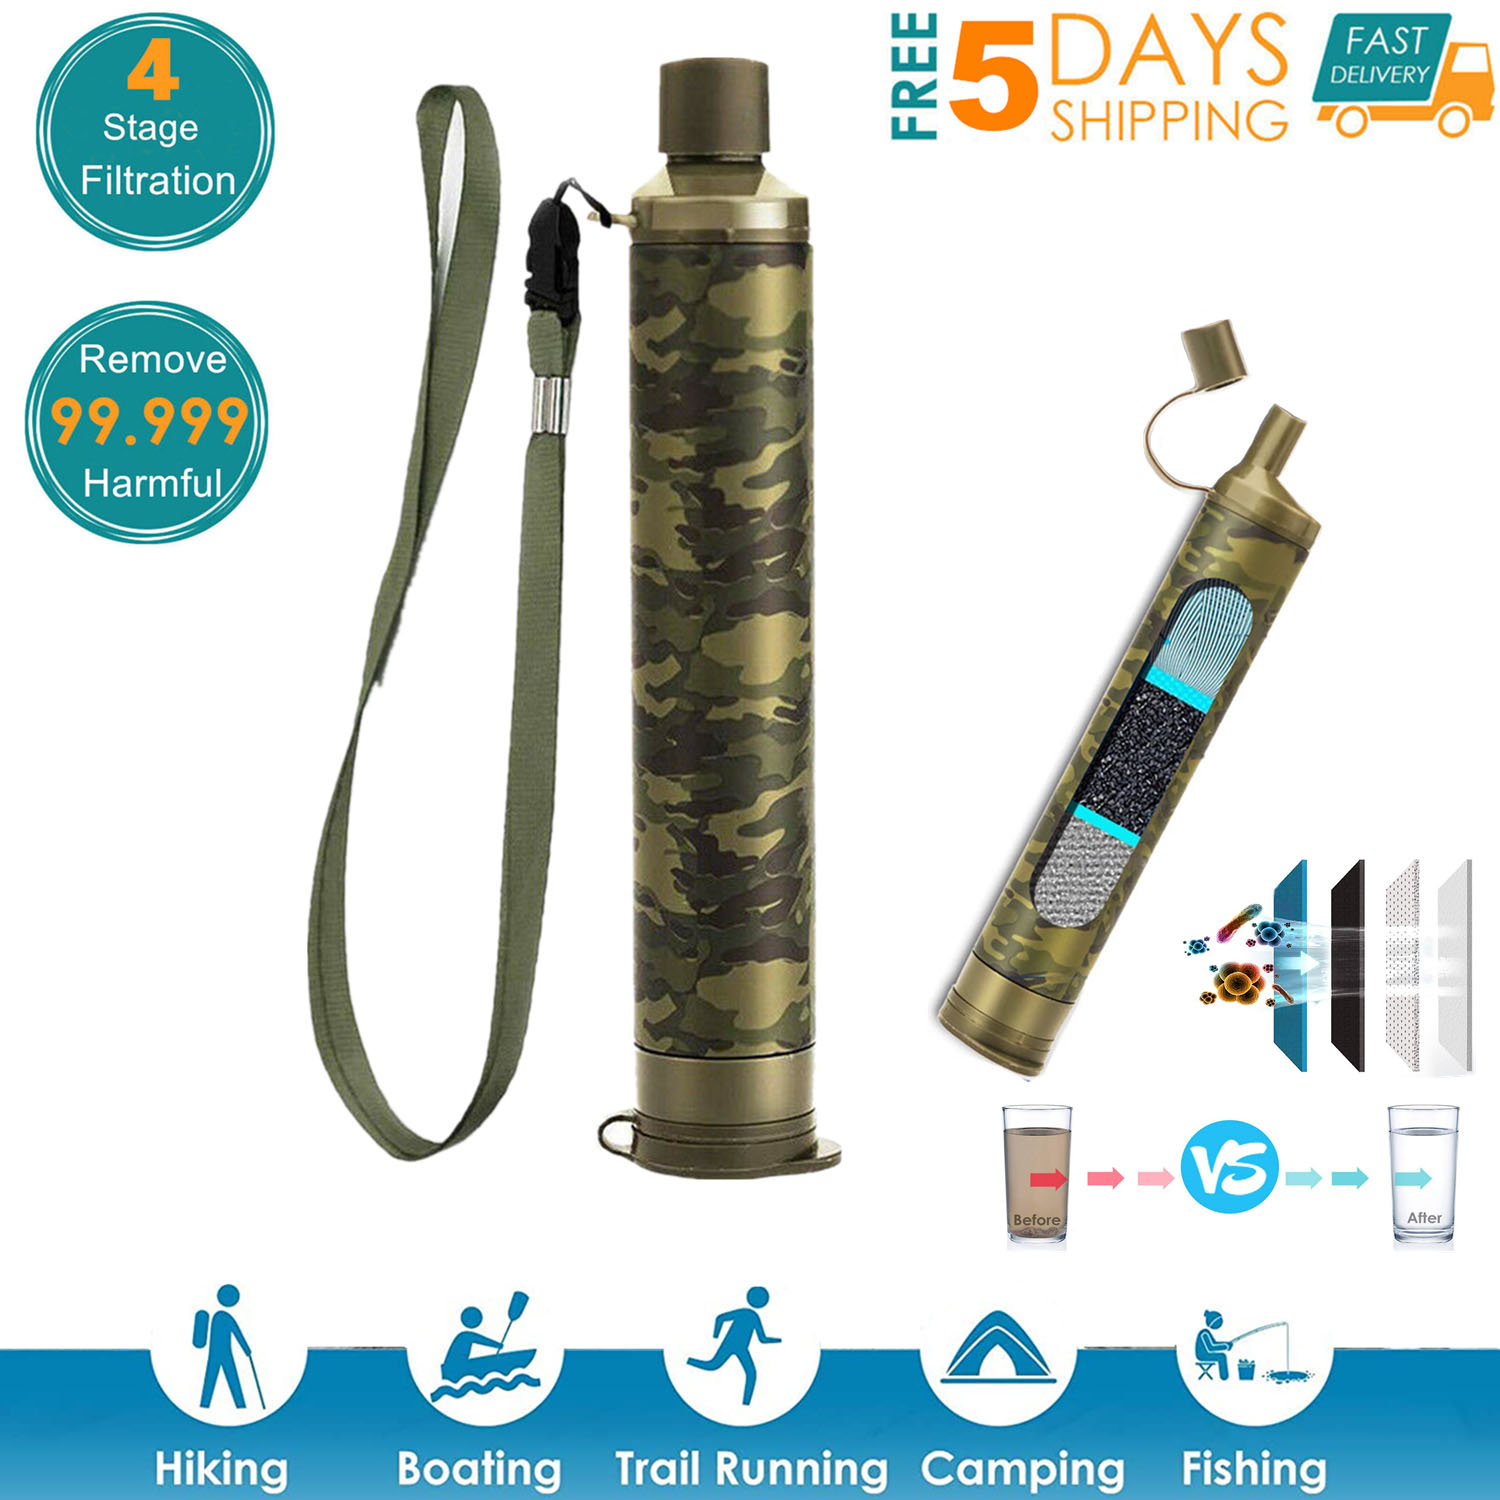 Camping Hiking Military Emergency Water Filter Purifier Pump Outdoor Surviv N5F7 